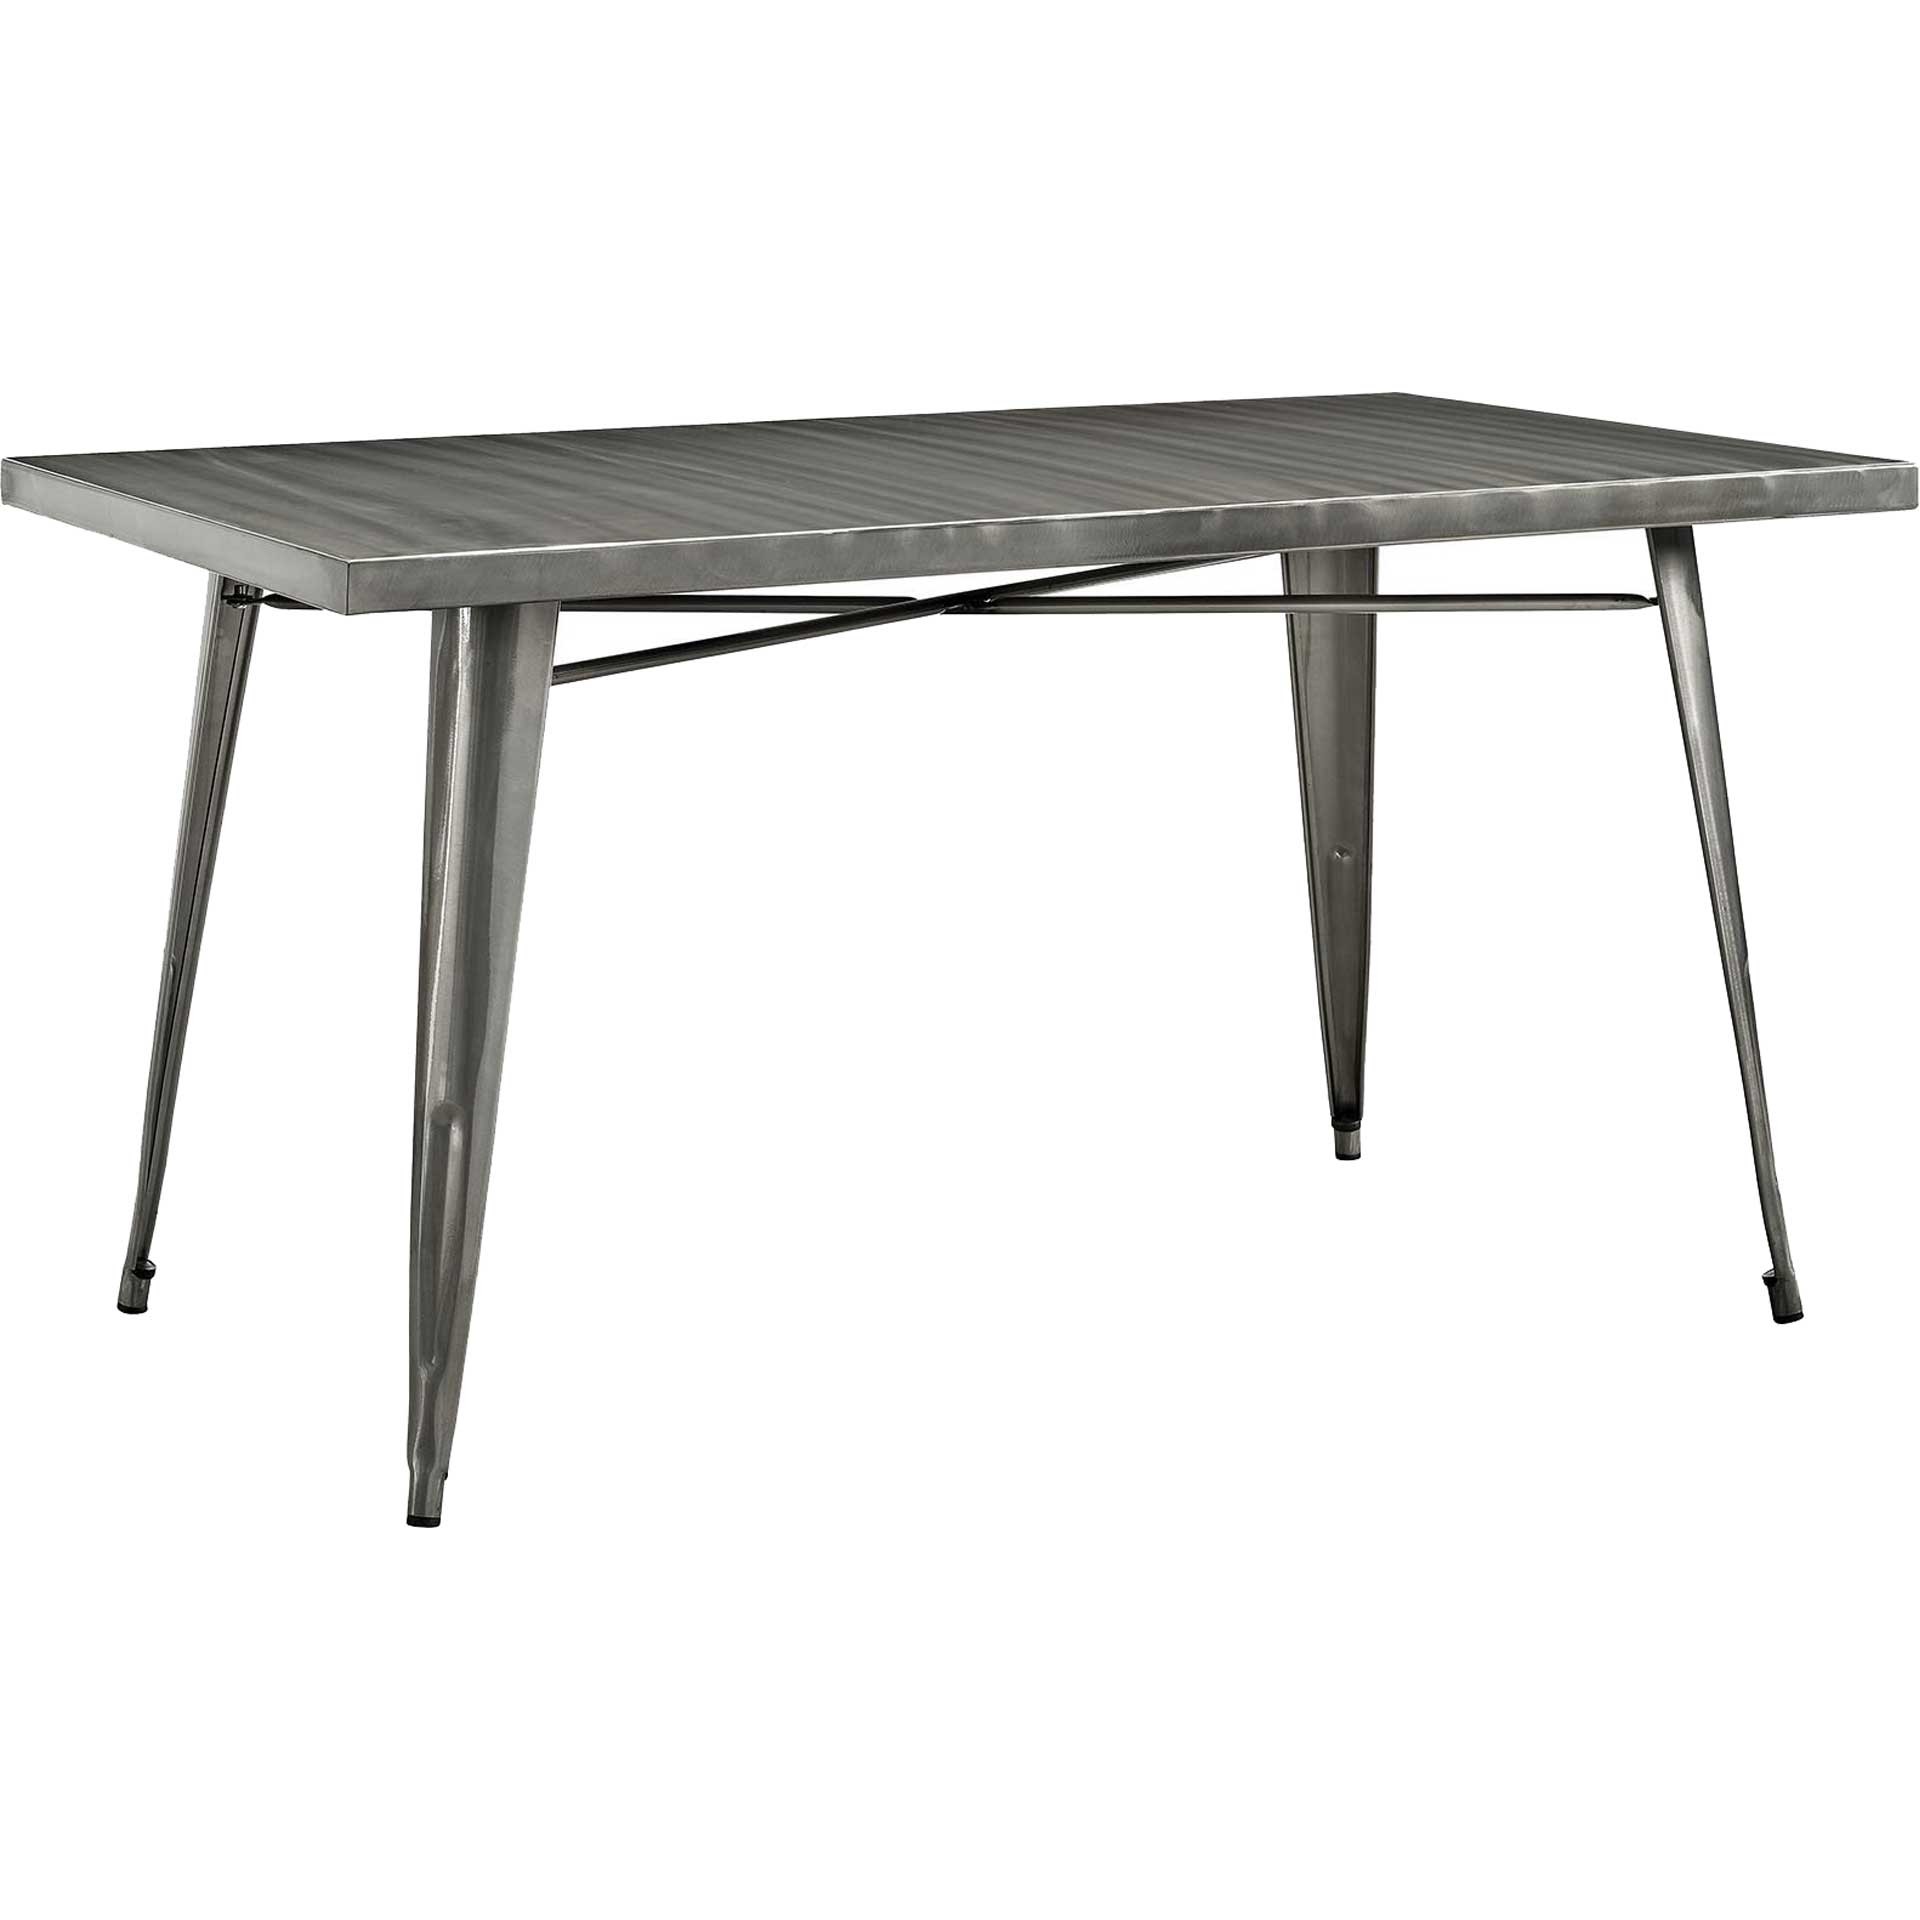 Modway Alacrity 60" Rustic Modern Farmhouse Stainless Steel Metal Rectangle Dining Table in Gunmetal